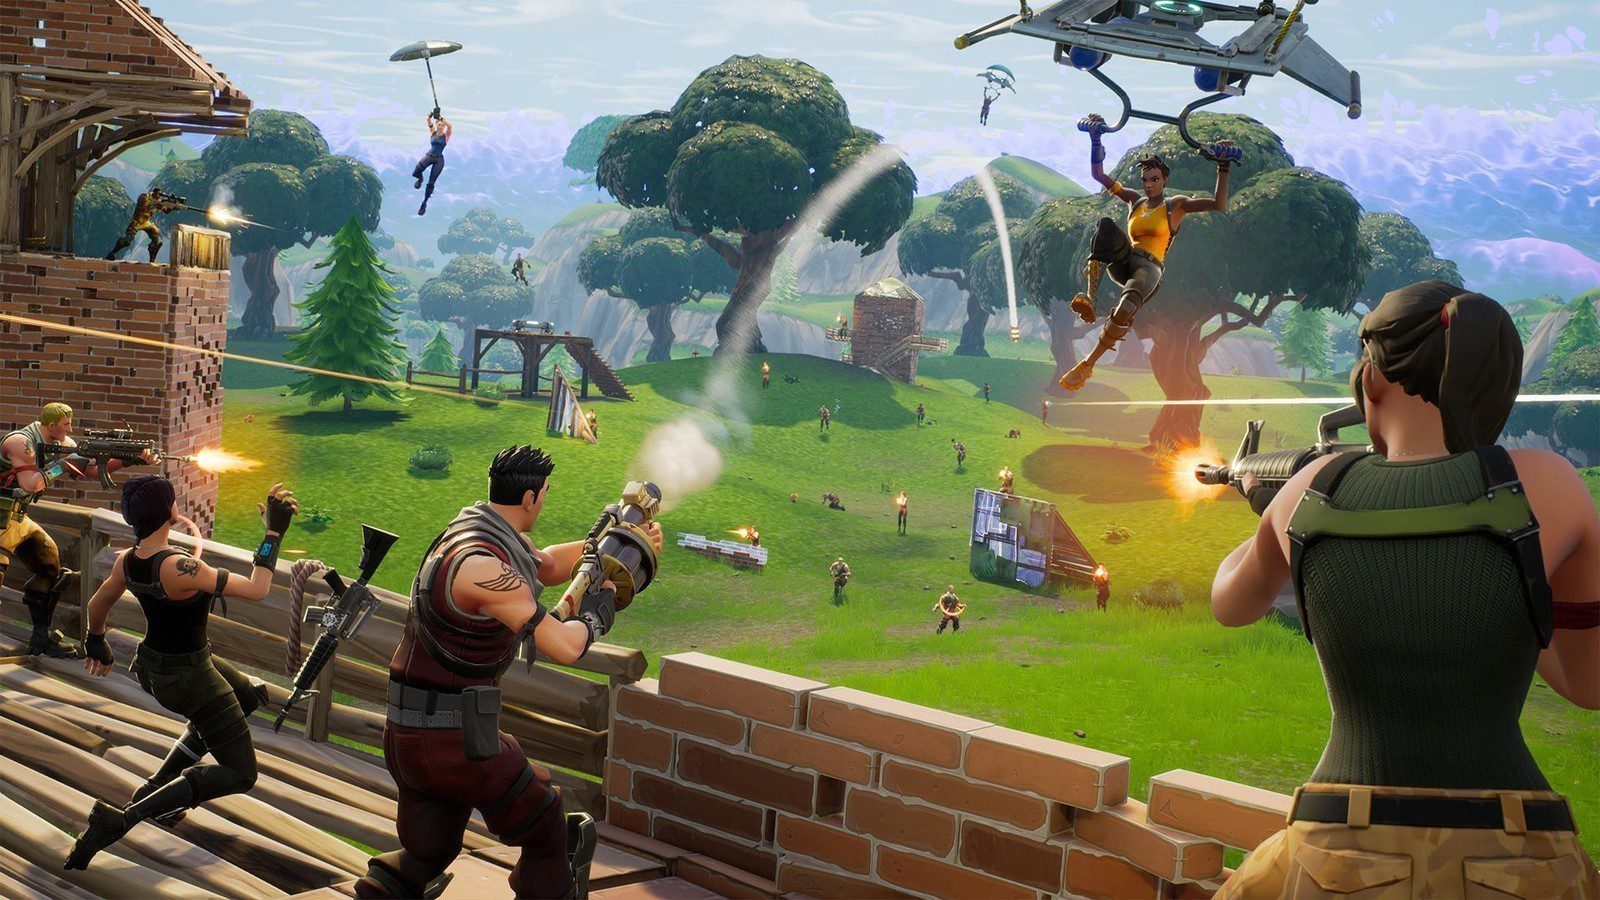 Fortnite is back on iPhones and iPads thanks to Nvidia